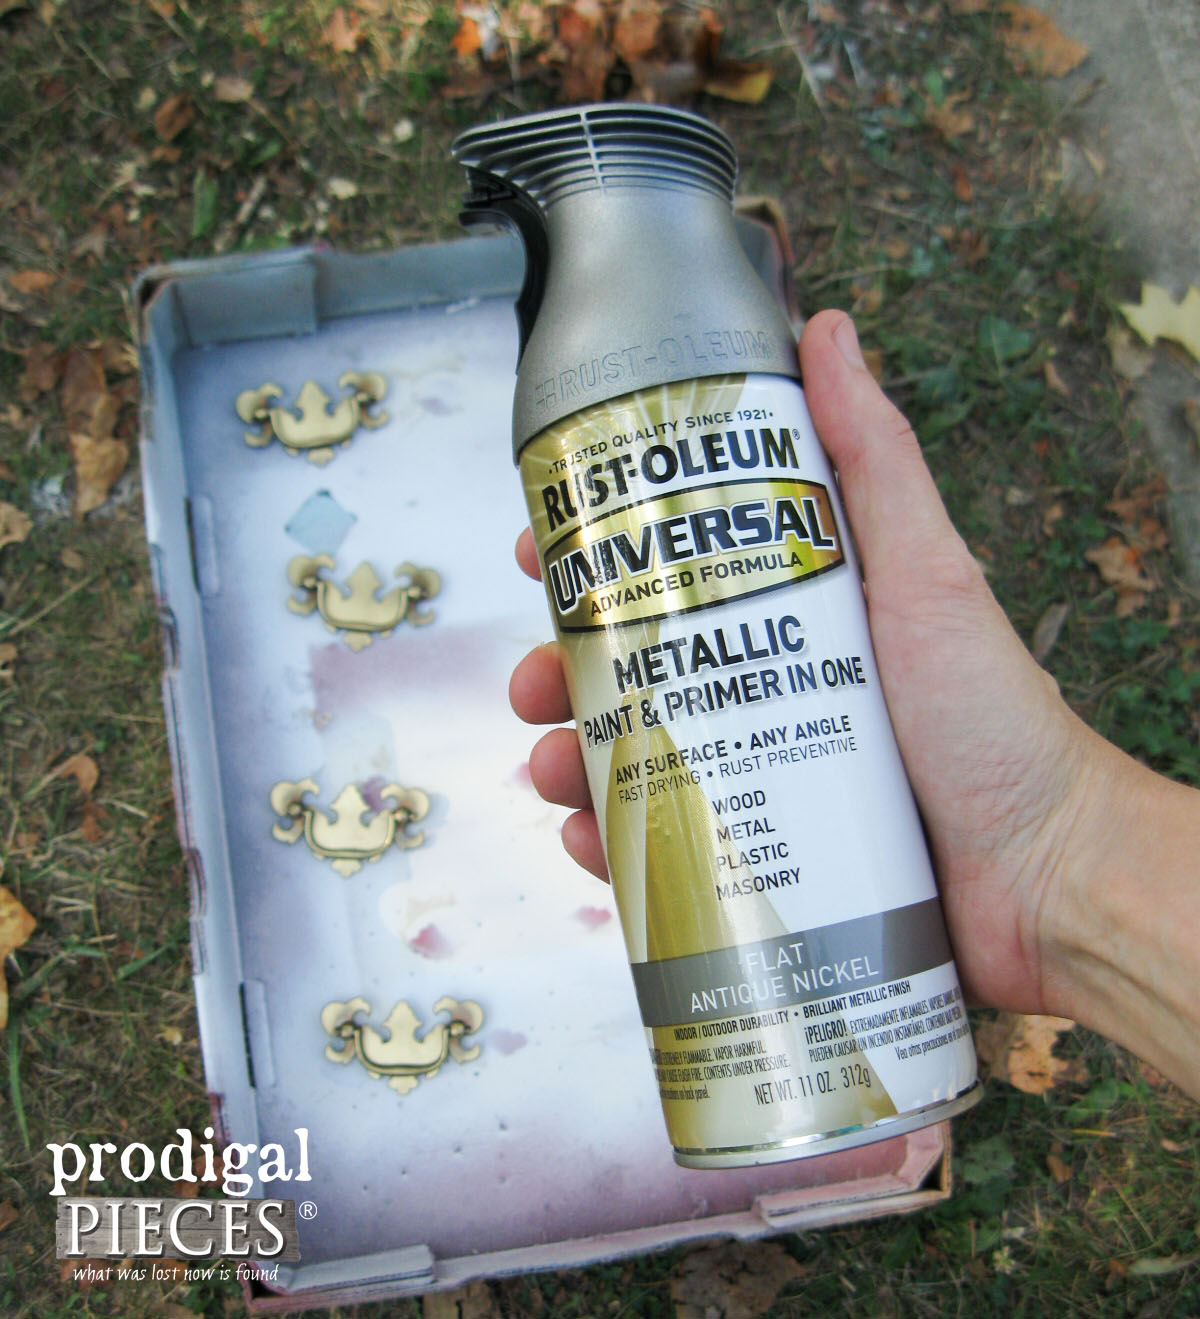 Antique Nickel Spray Paint for Nightstand Pulls | Prodigal Pieces | prodigalpieces.com